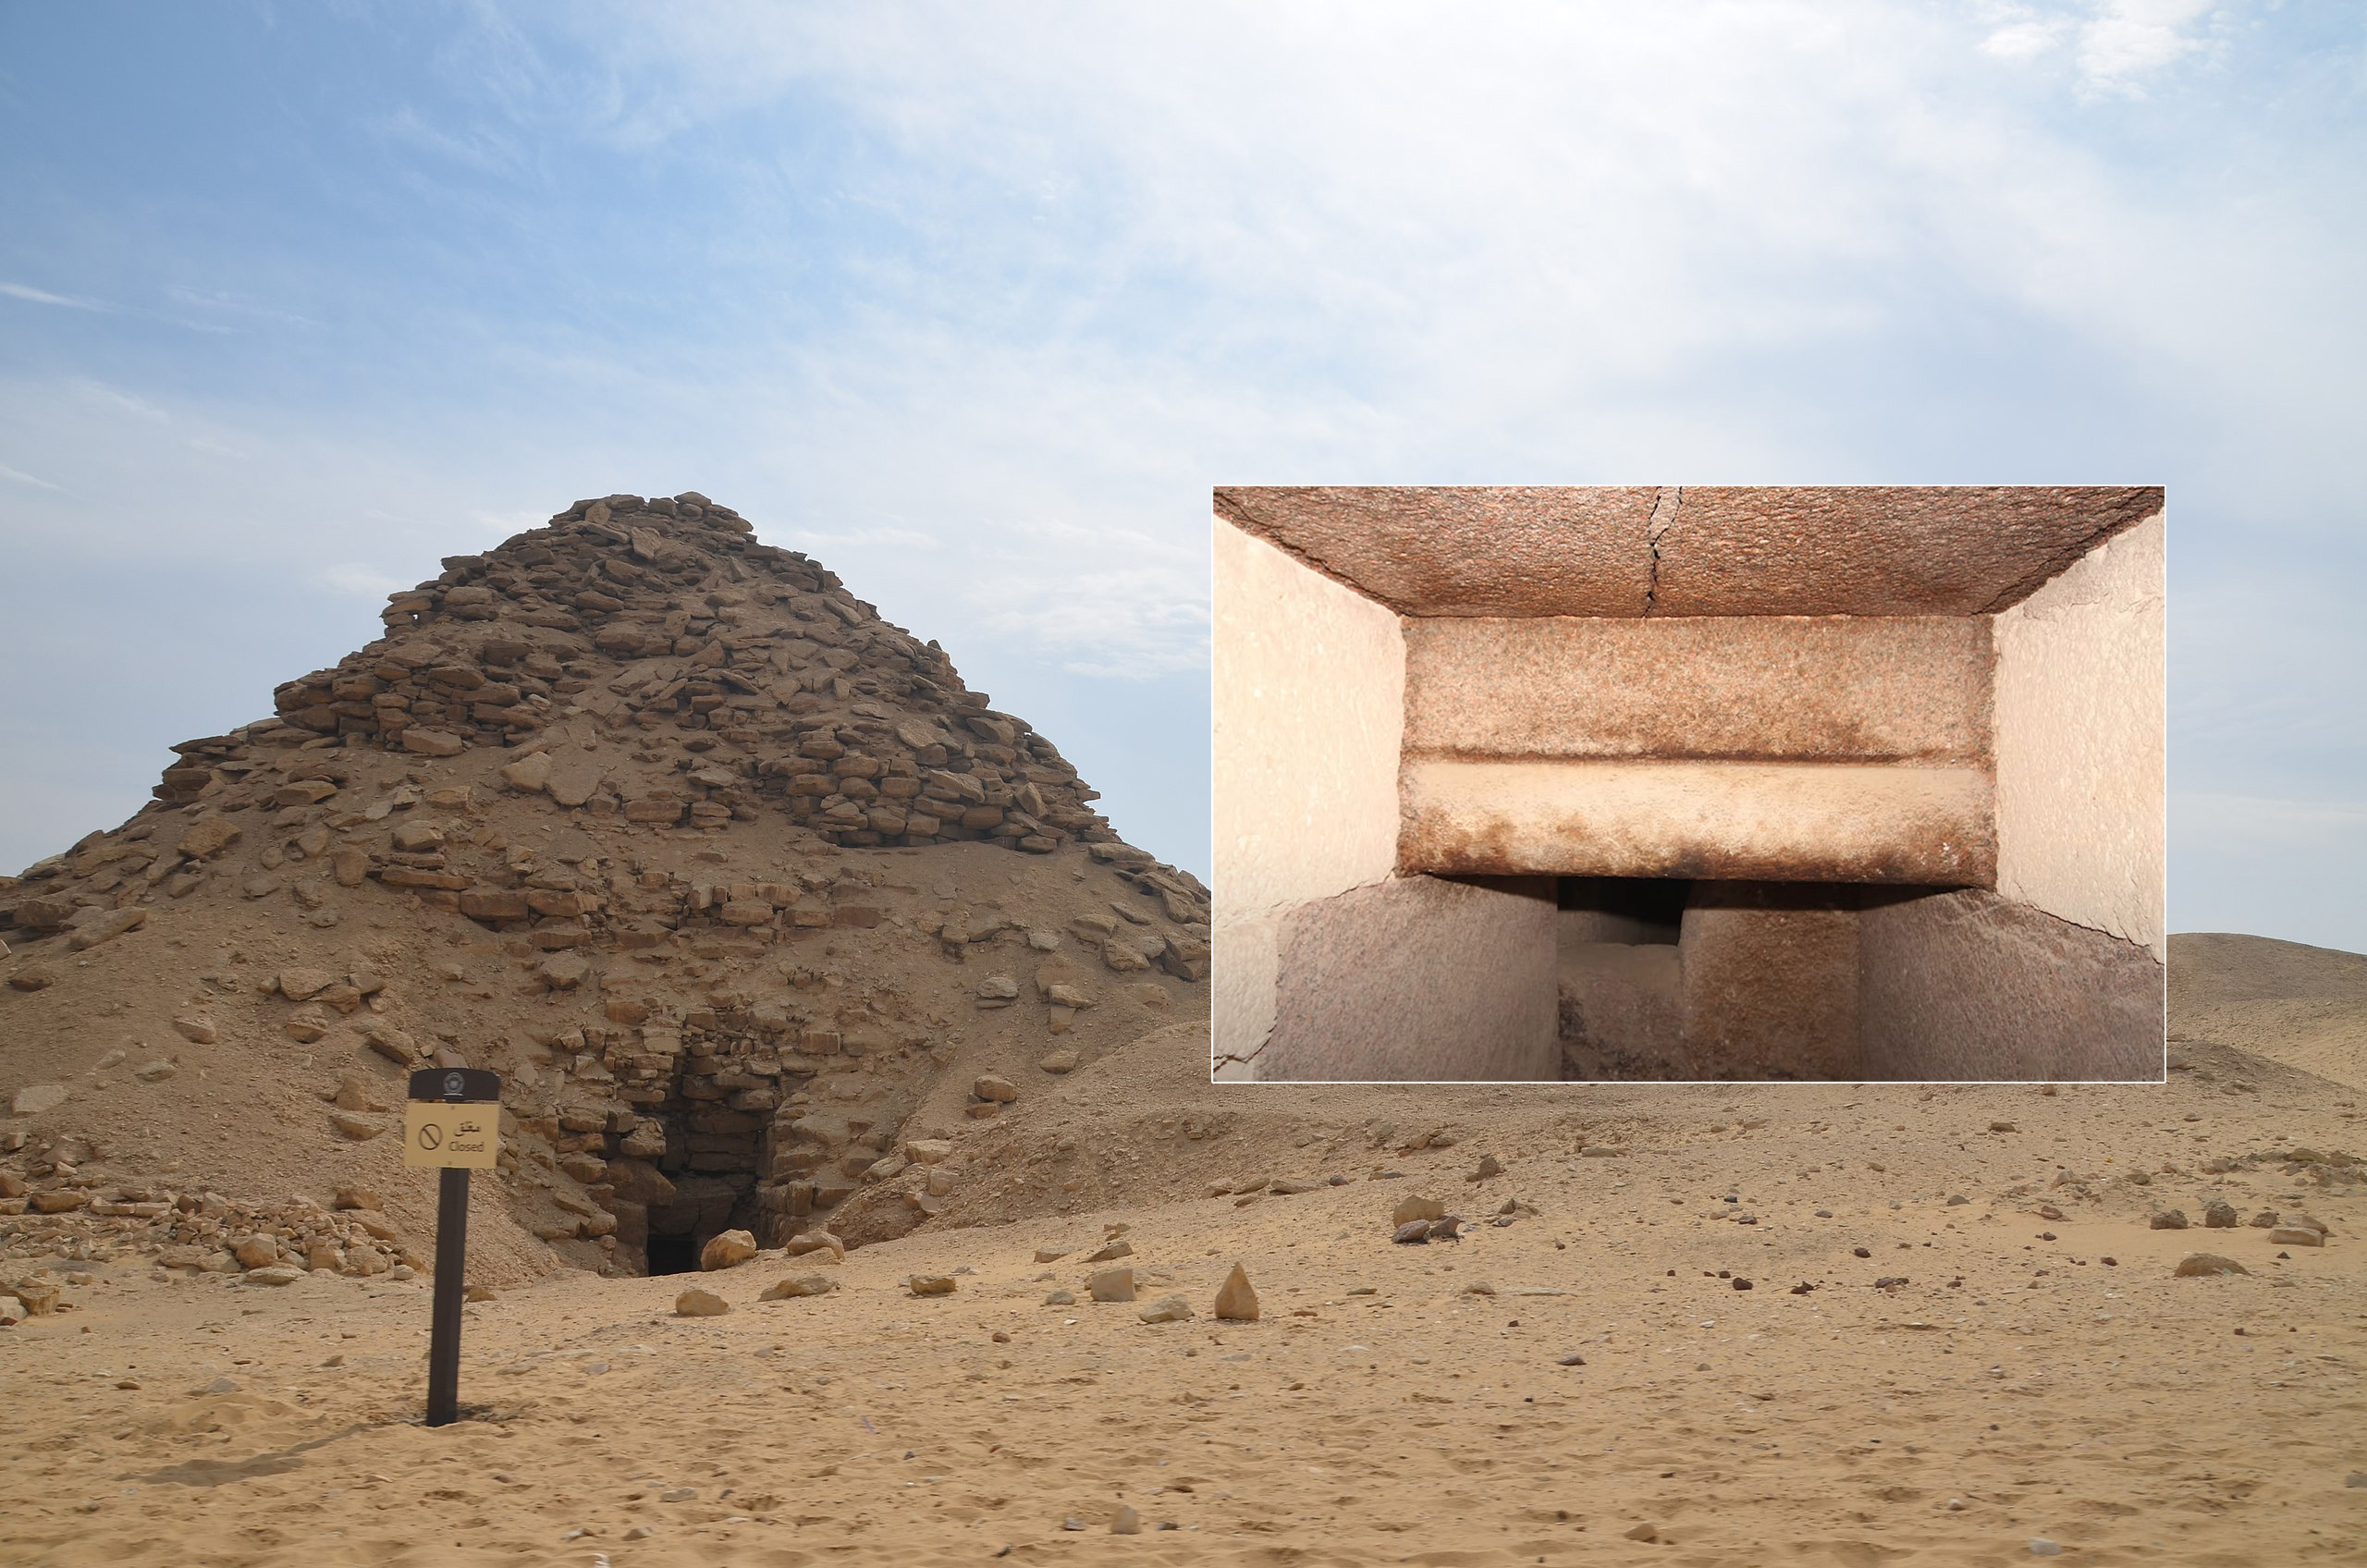 An image showing the remnants of the Pyramid of Userkaf and a small image of its inside. Wikimedia Commons.